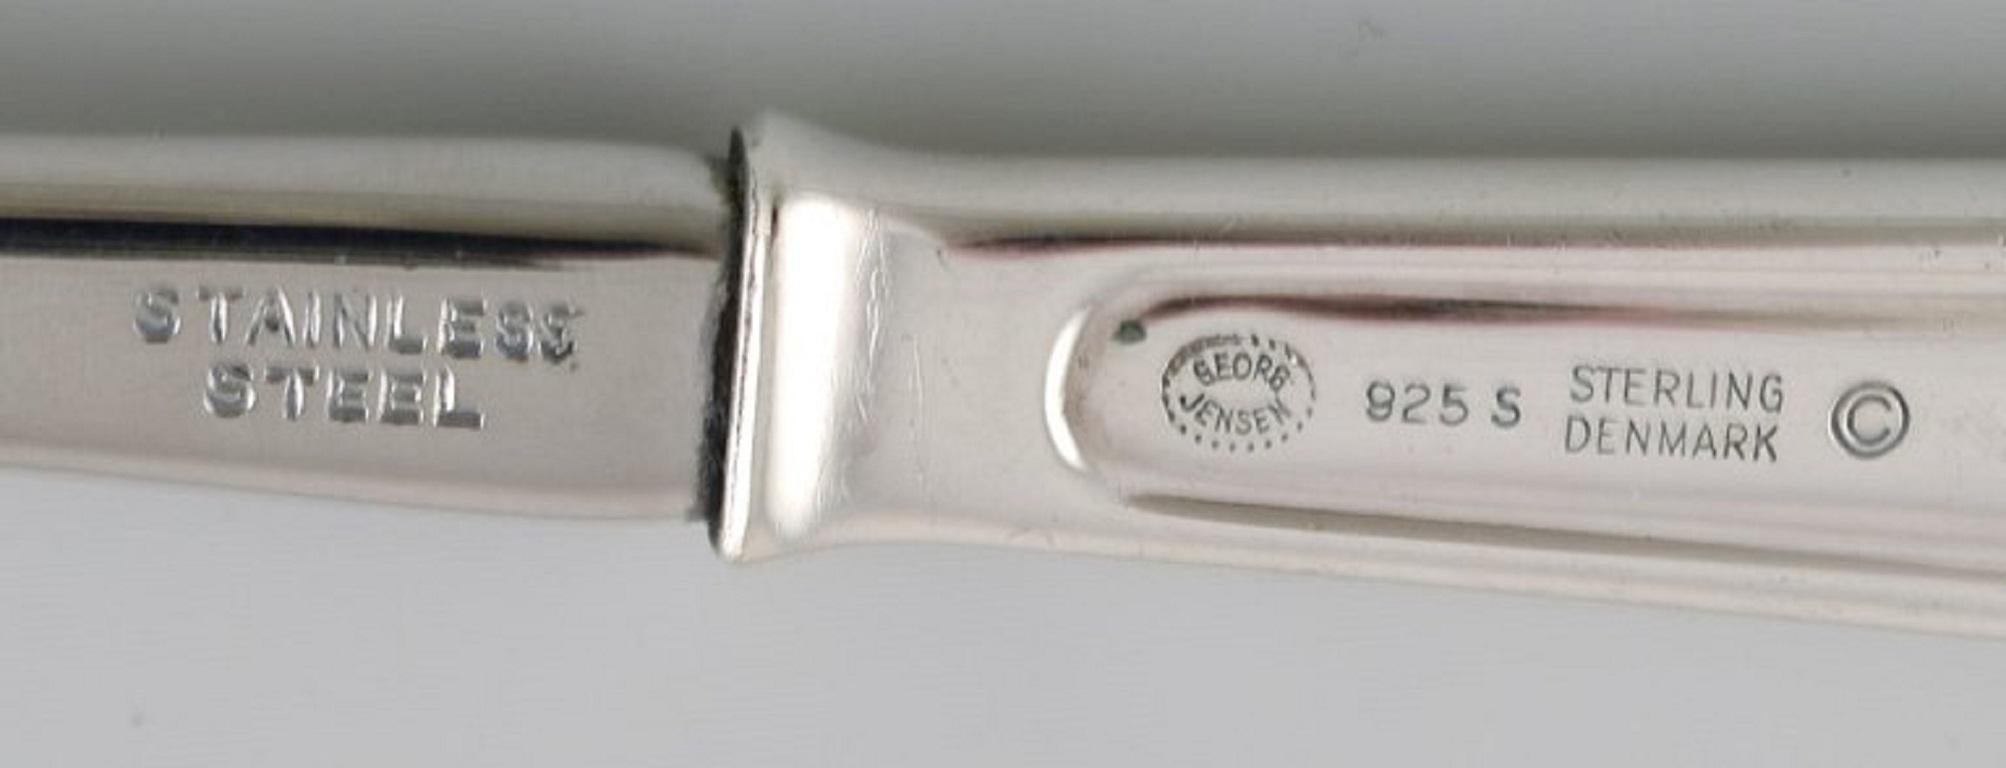 20th Century Rare Georg Jensen Koppel Cutlery, Dinner Service in Sterling Silver for 10 P. For Sale